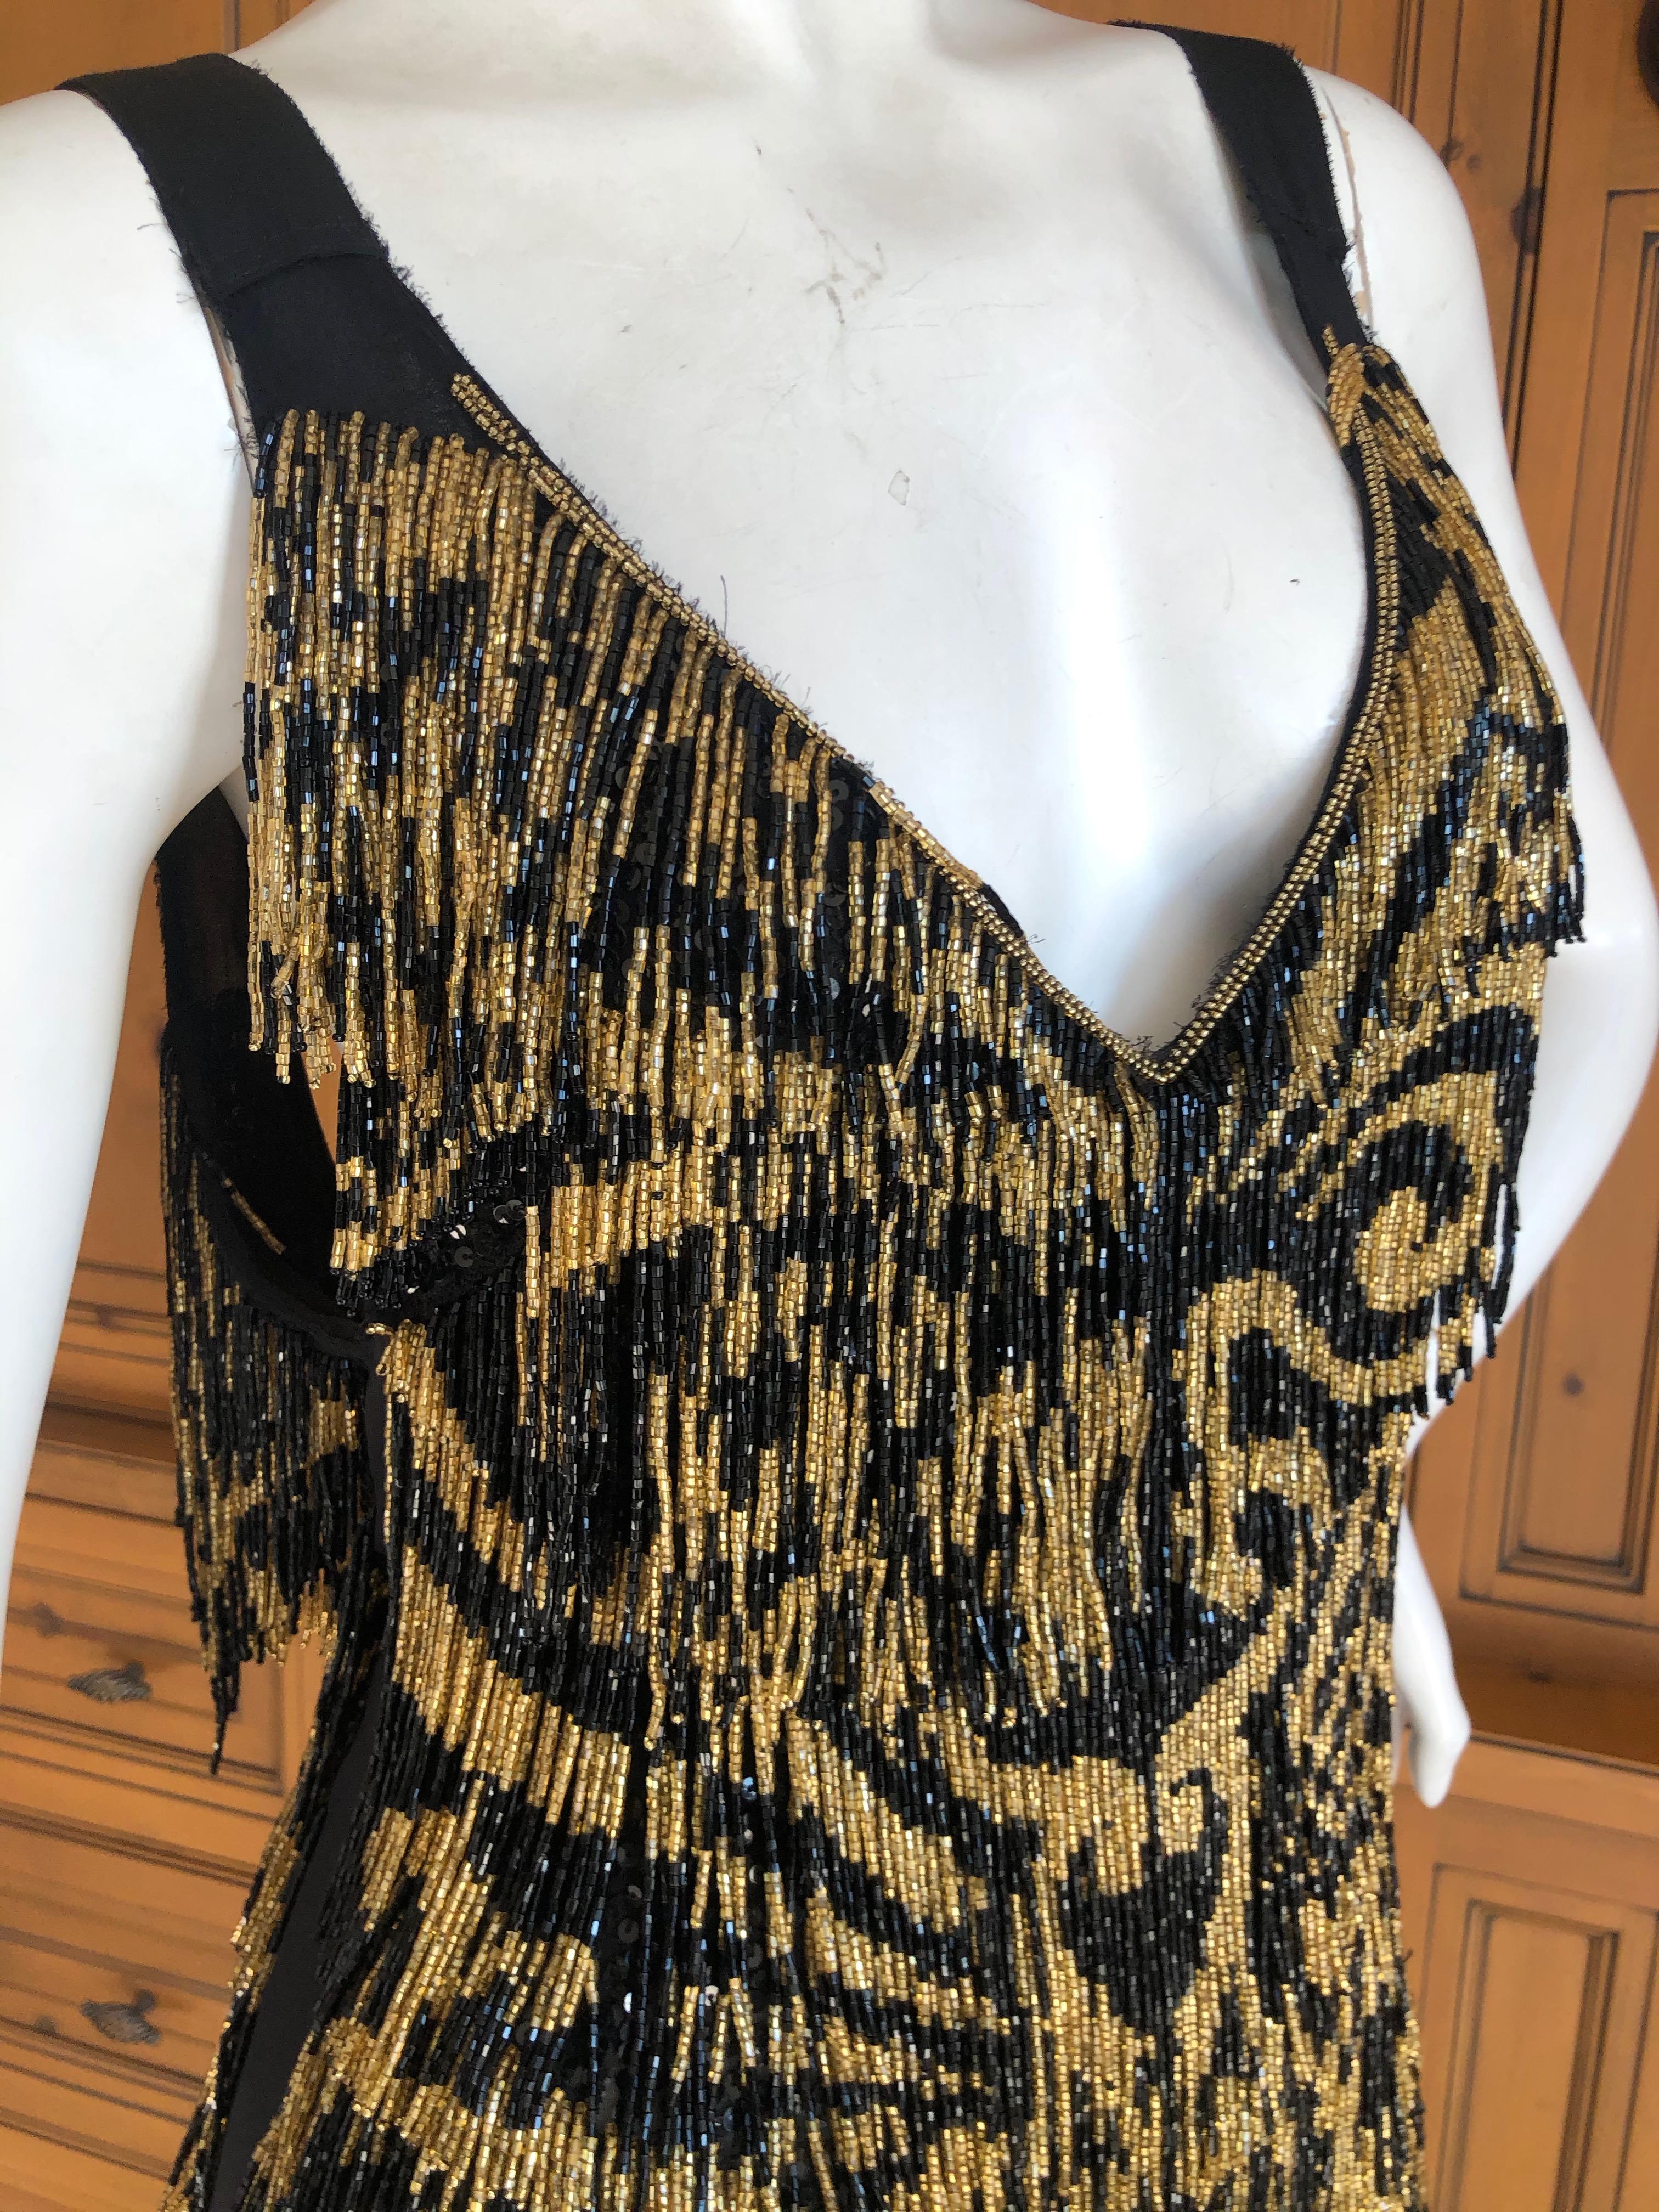 Emilio Pucci Flapper Style Black & Gold Glass Bead Fringed Mini Dress New / Tags In New Condition For Sale In Cloverdale, CA